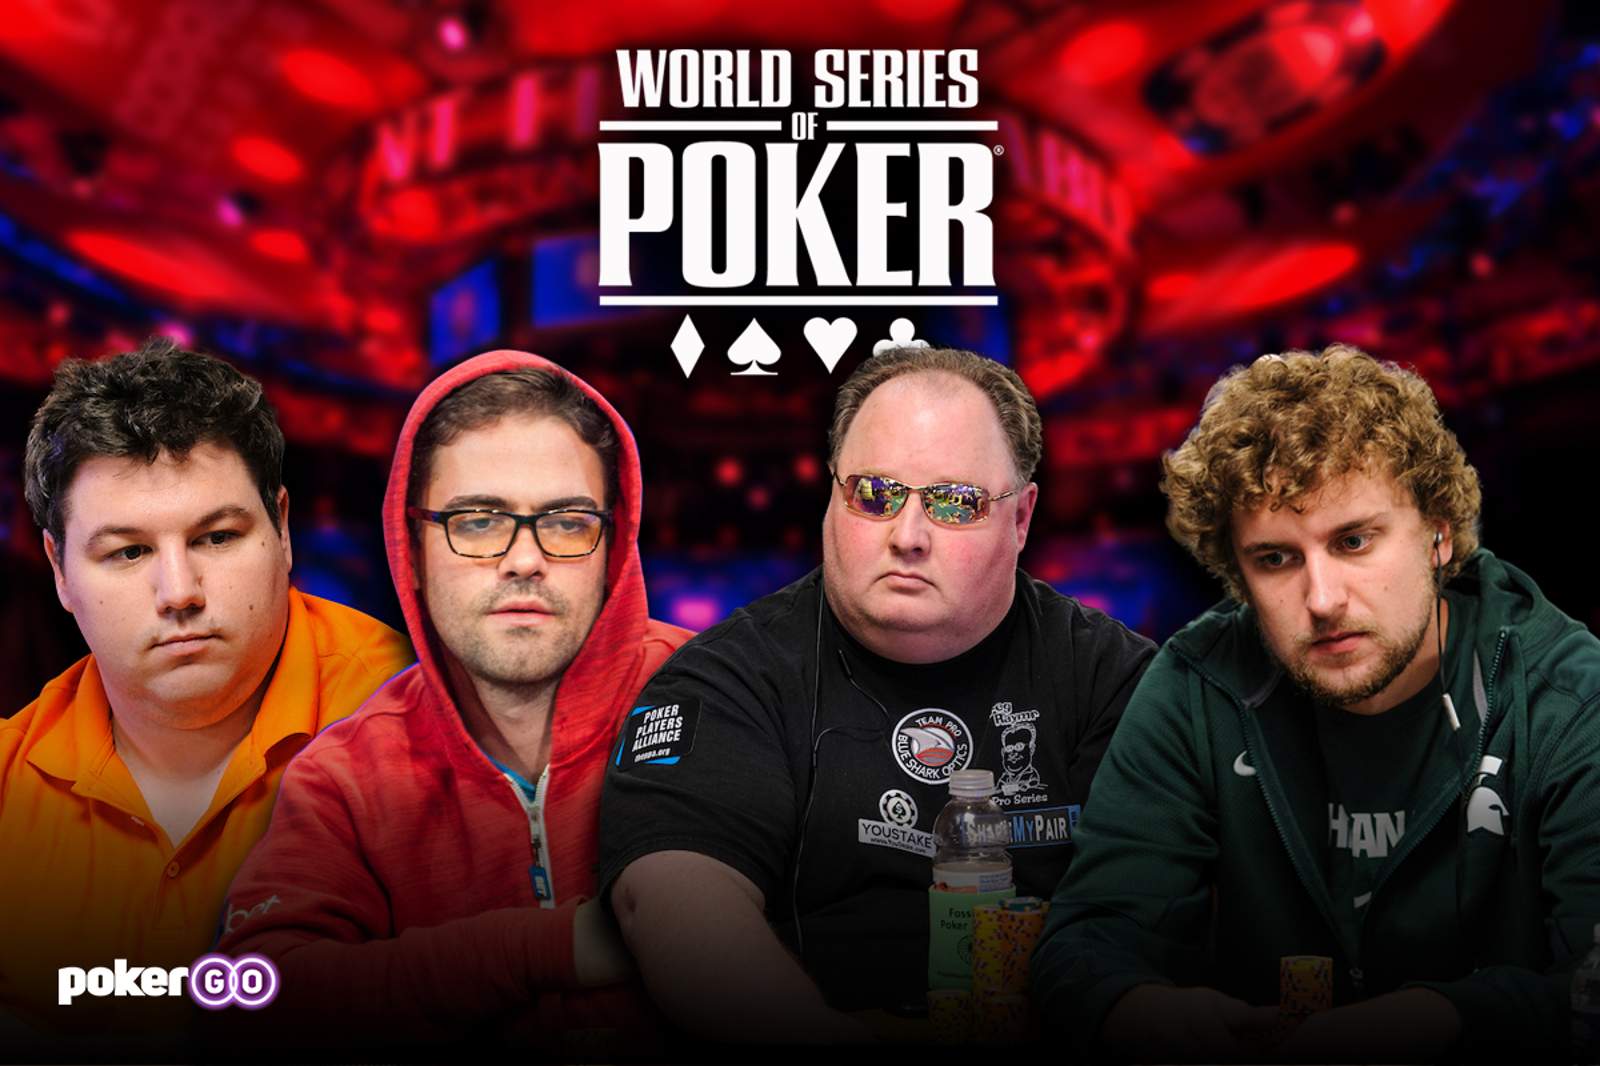 2016 WSOP Main Event: James Obst and Shaun Deeb Captain The Feature Table